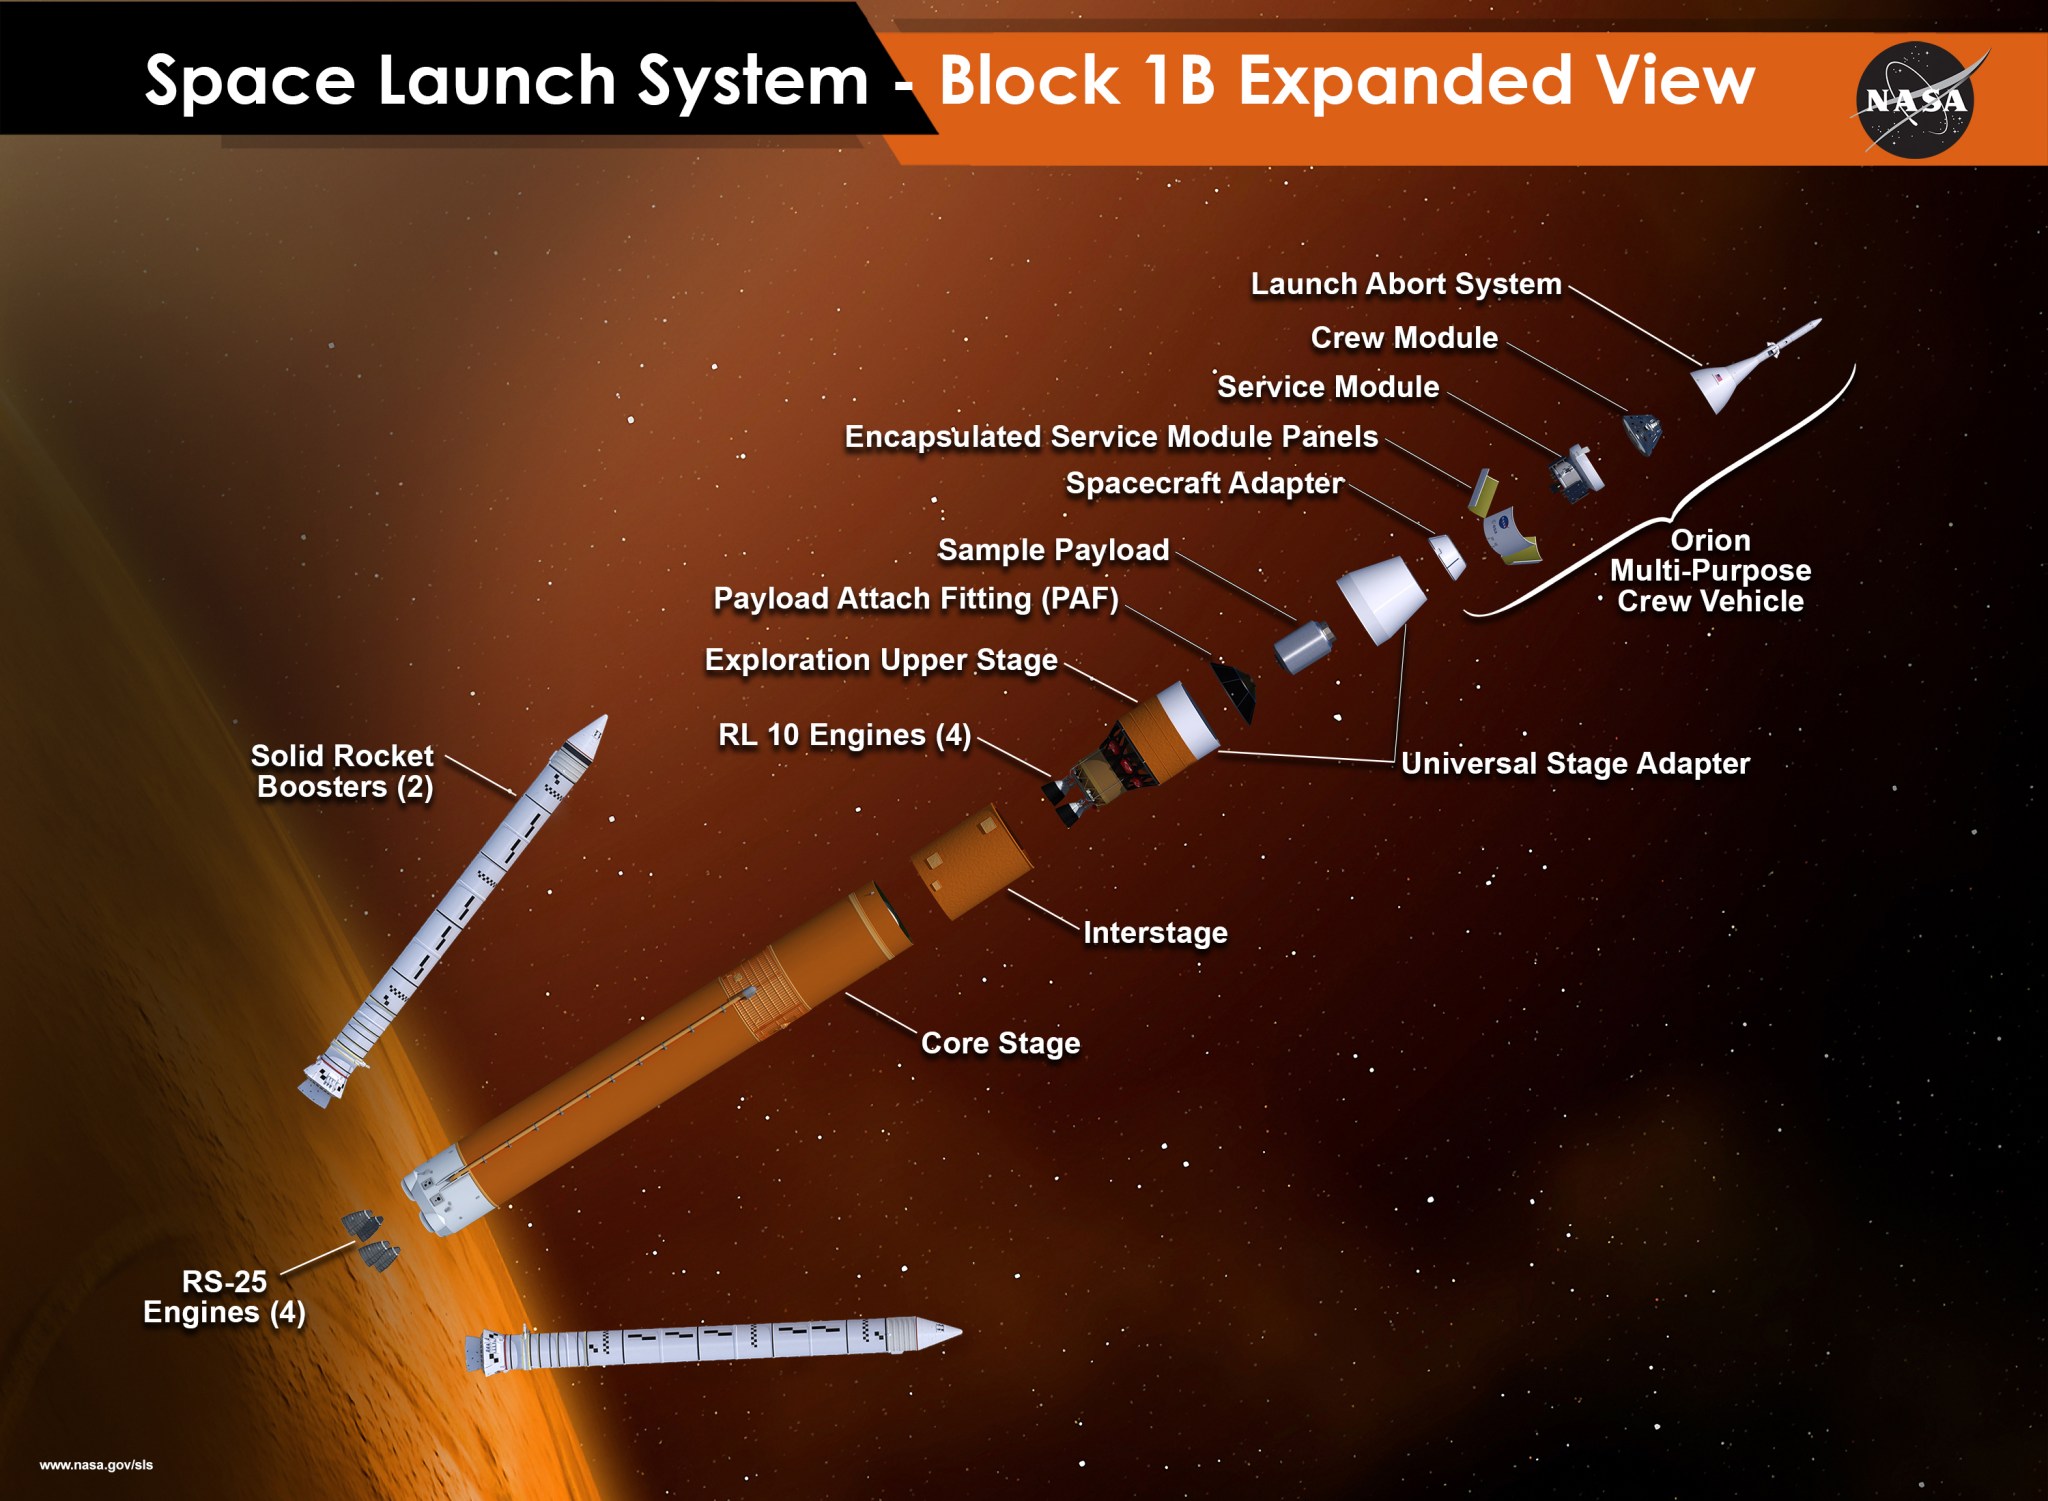 Expanded view of the next configuration of NASA's Space Launch System rocket